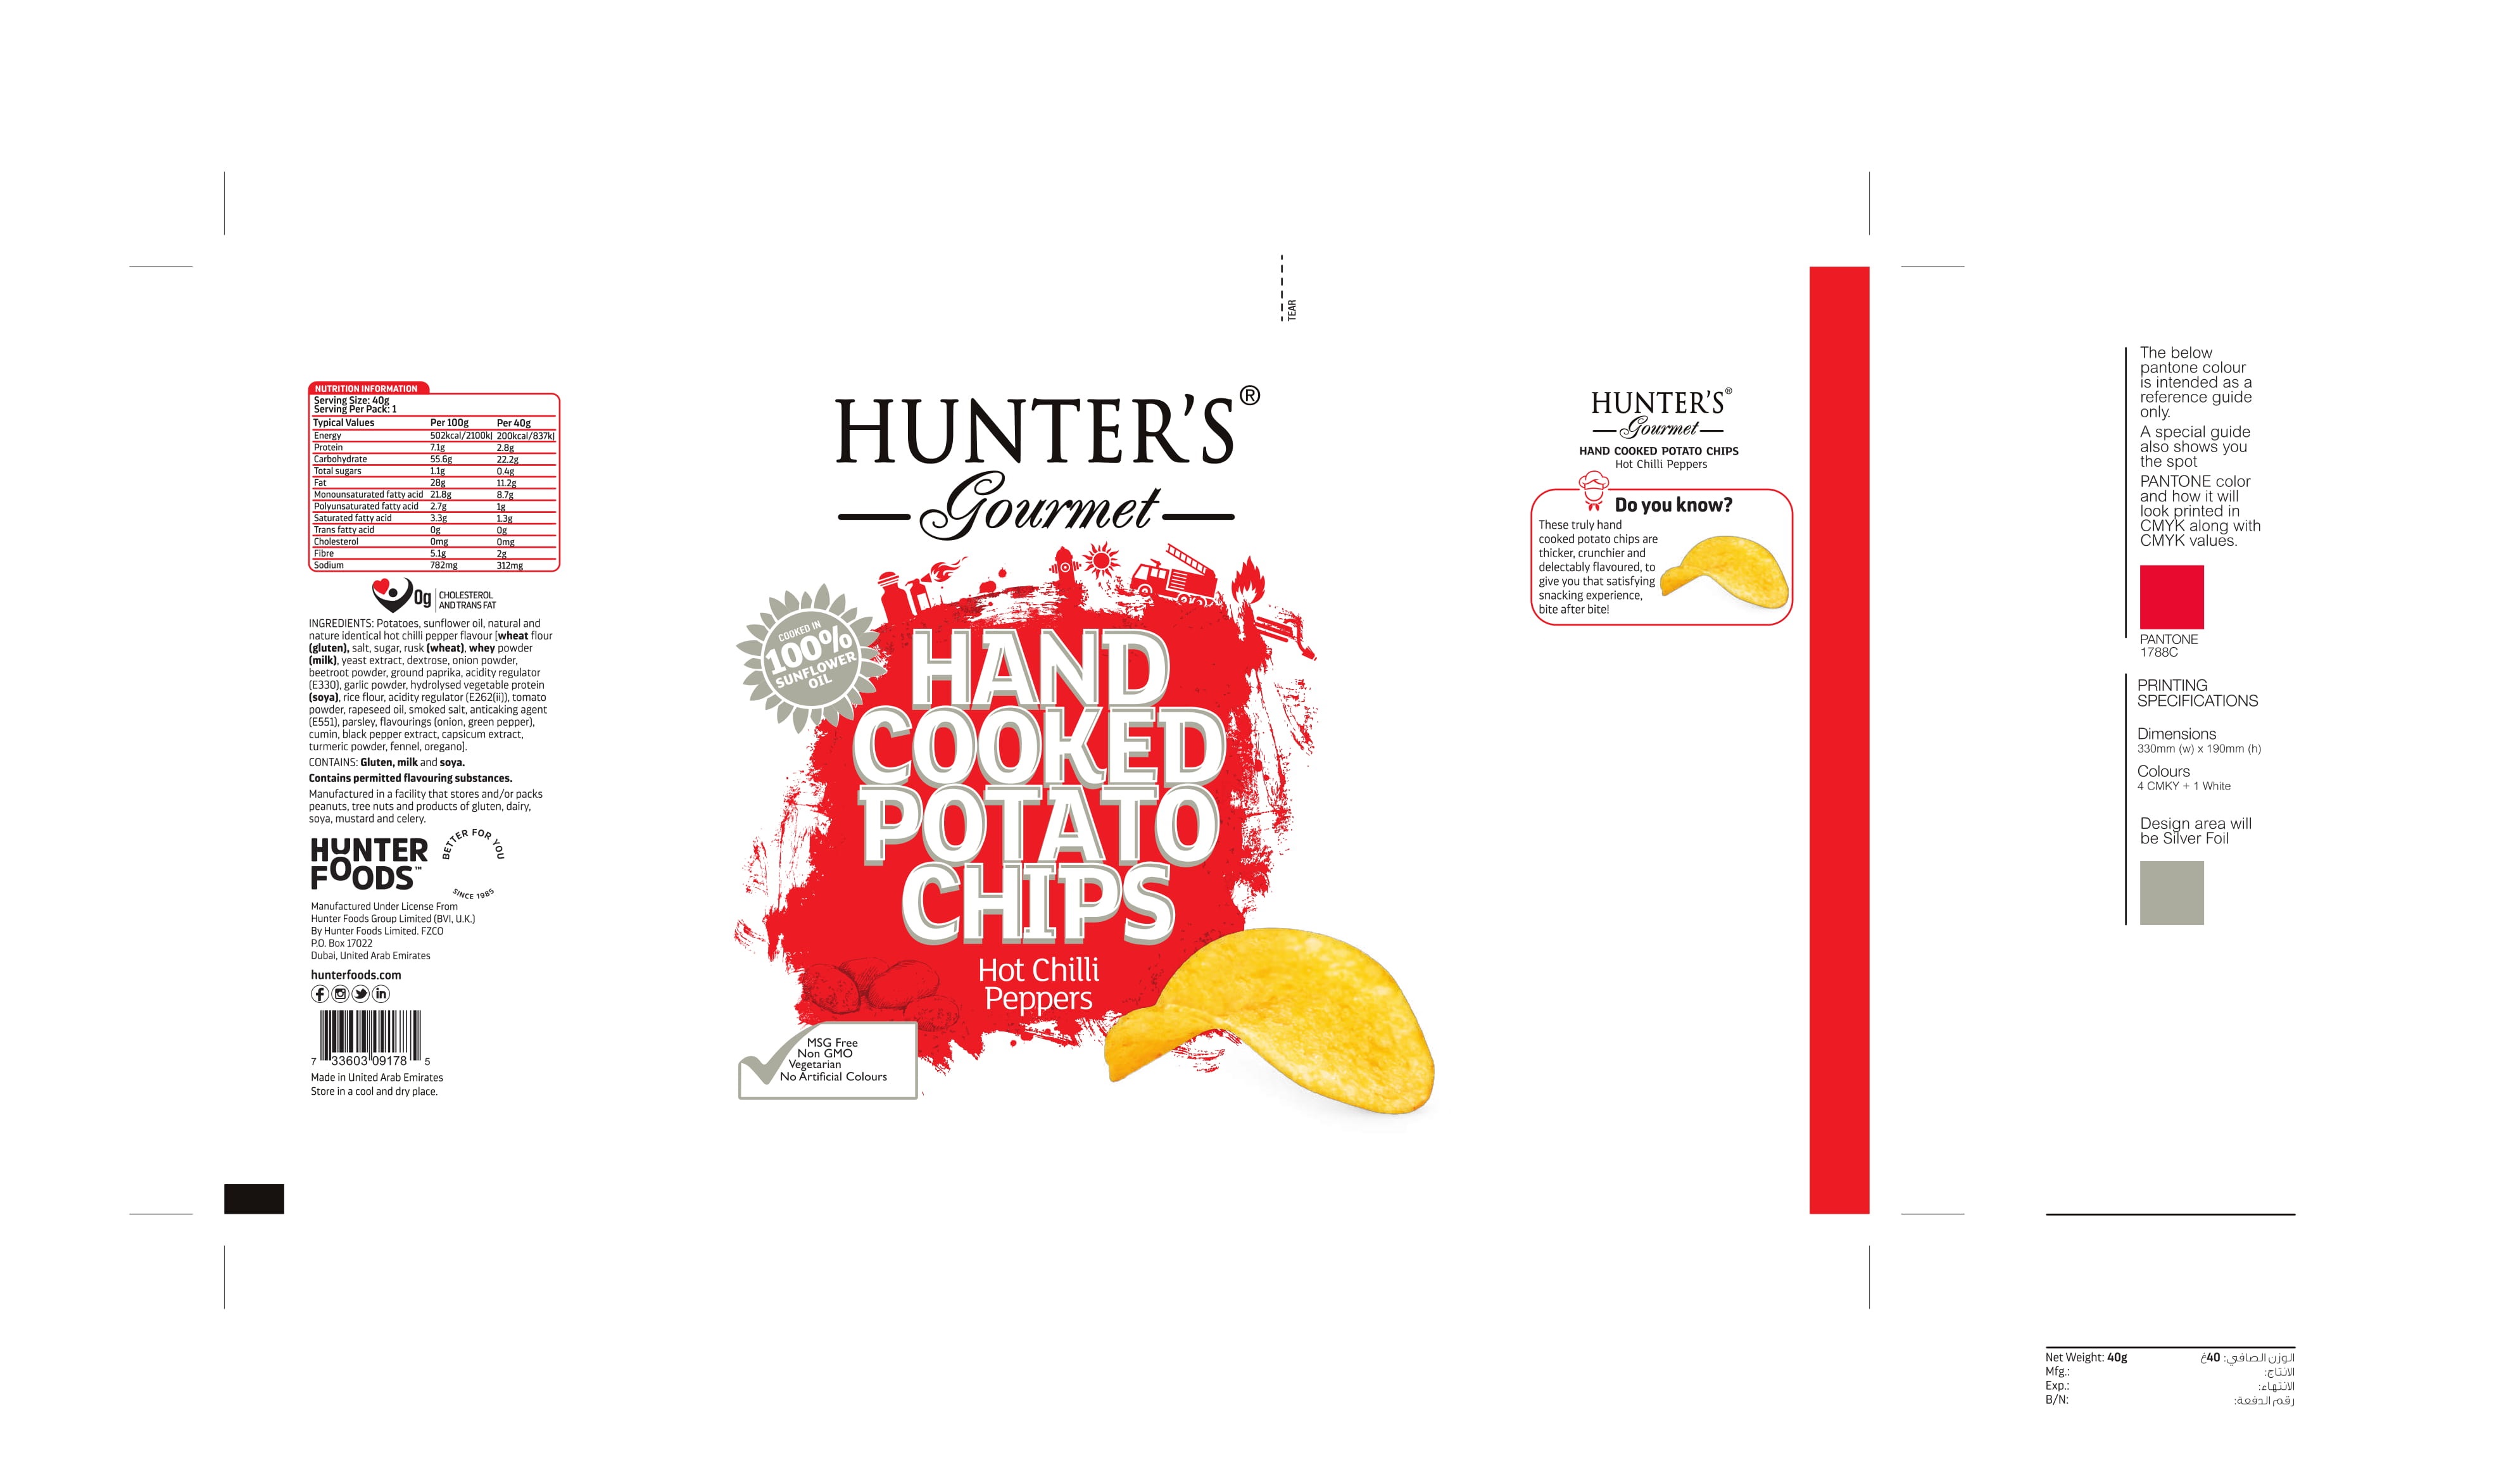 Hunter's Gourmet Hand Cooked Potato Chips Hot Chilli Peppers 24 units per case 40 g Product Label